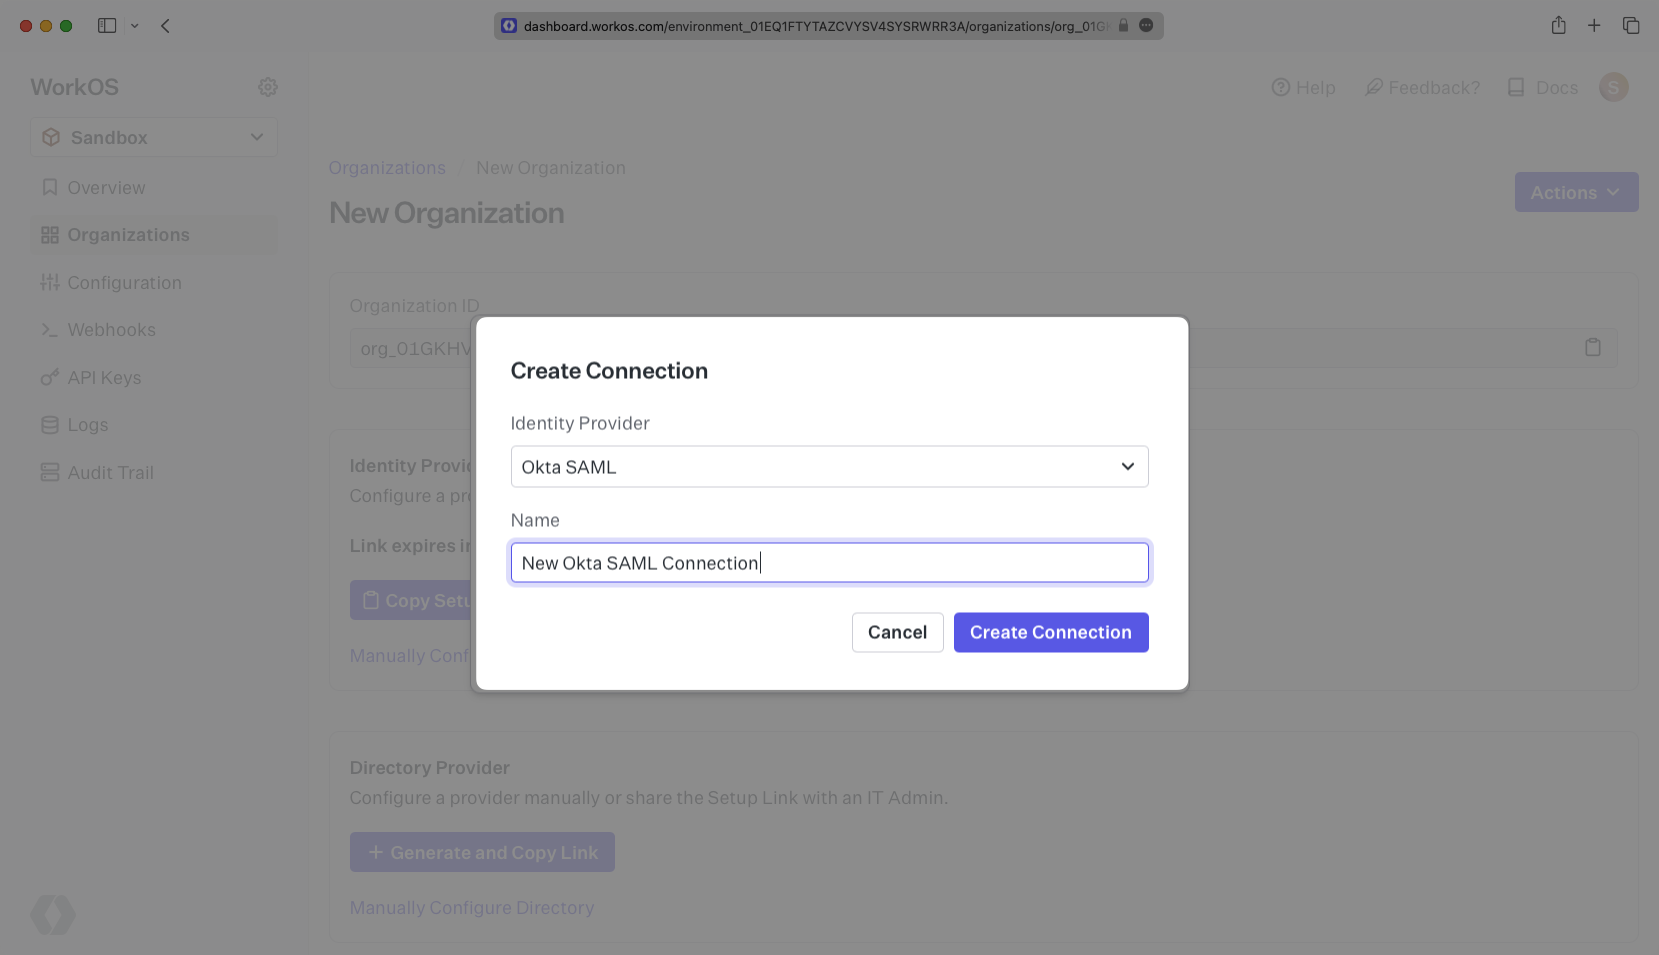 A screenshot showing "Create Connection" details in the WorkOS Dashboard.